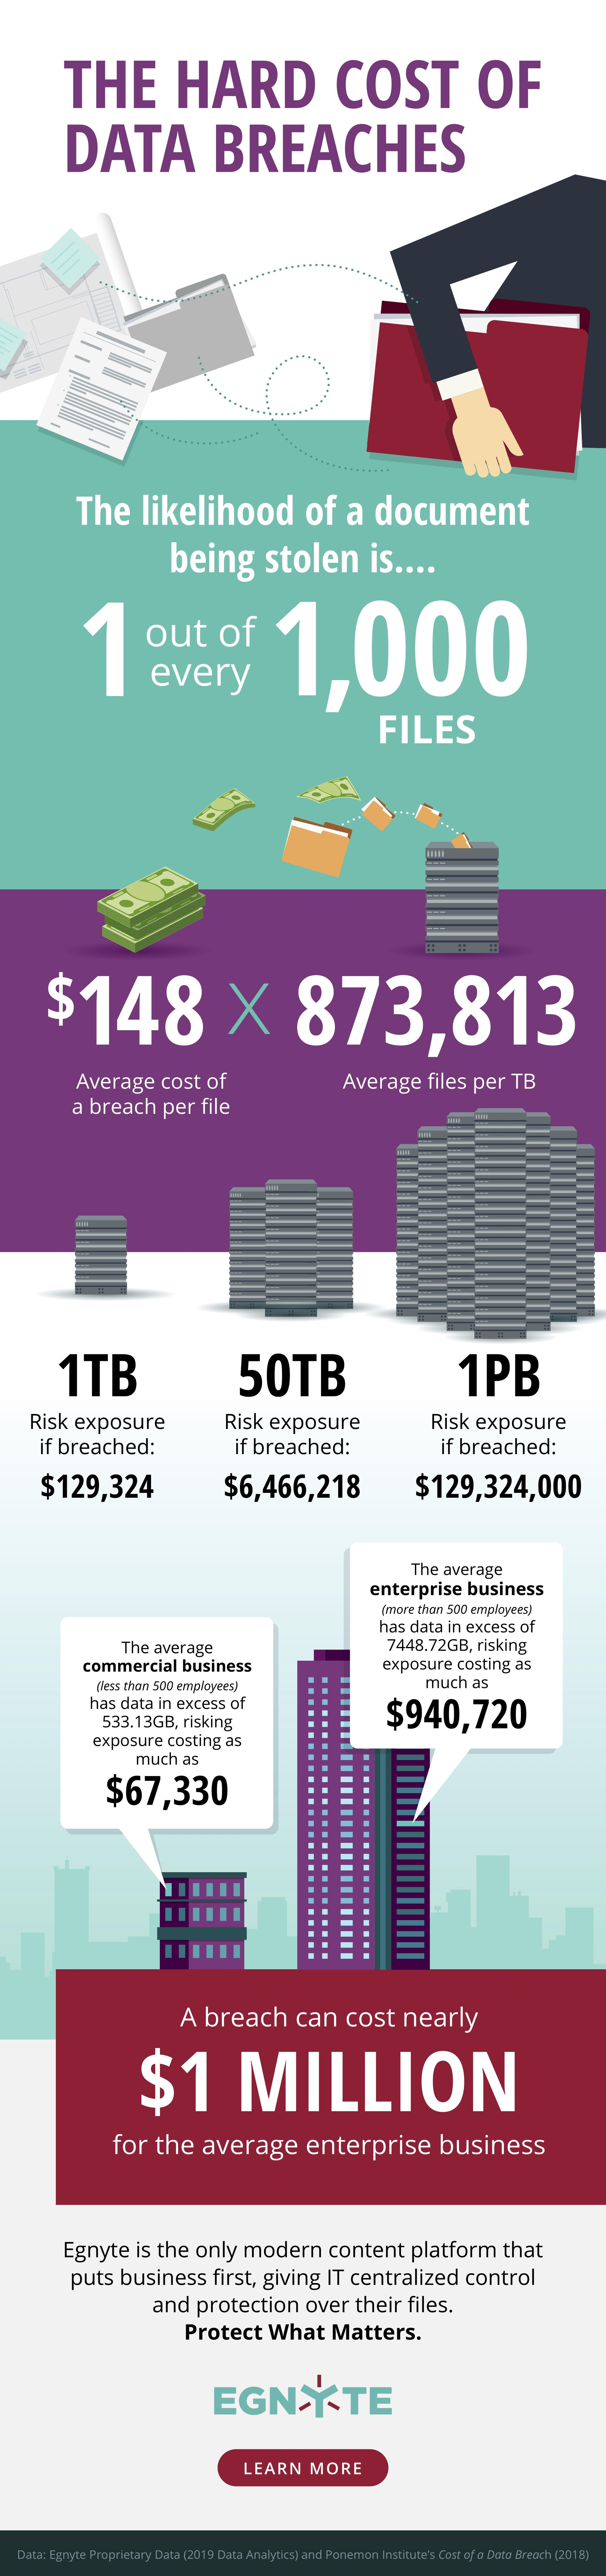 The Hard Cost of Data Breaches